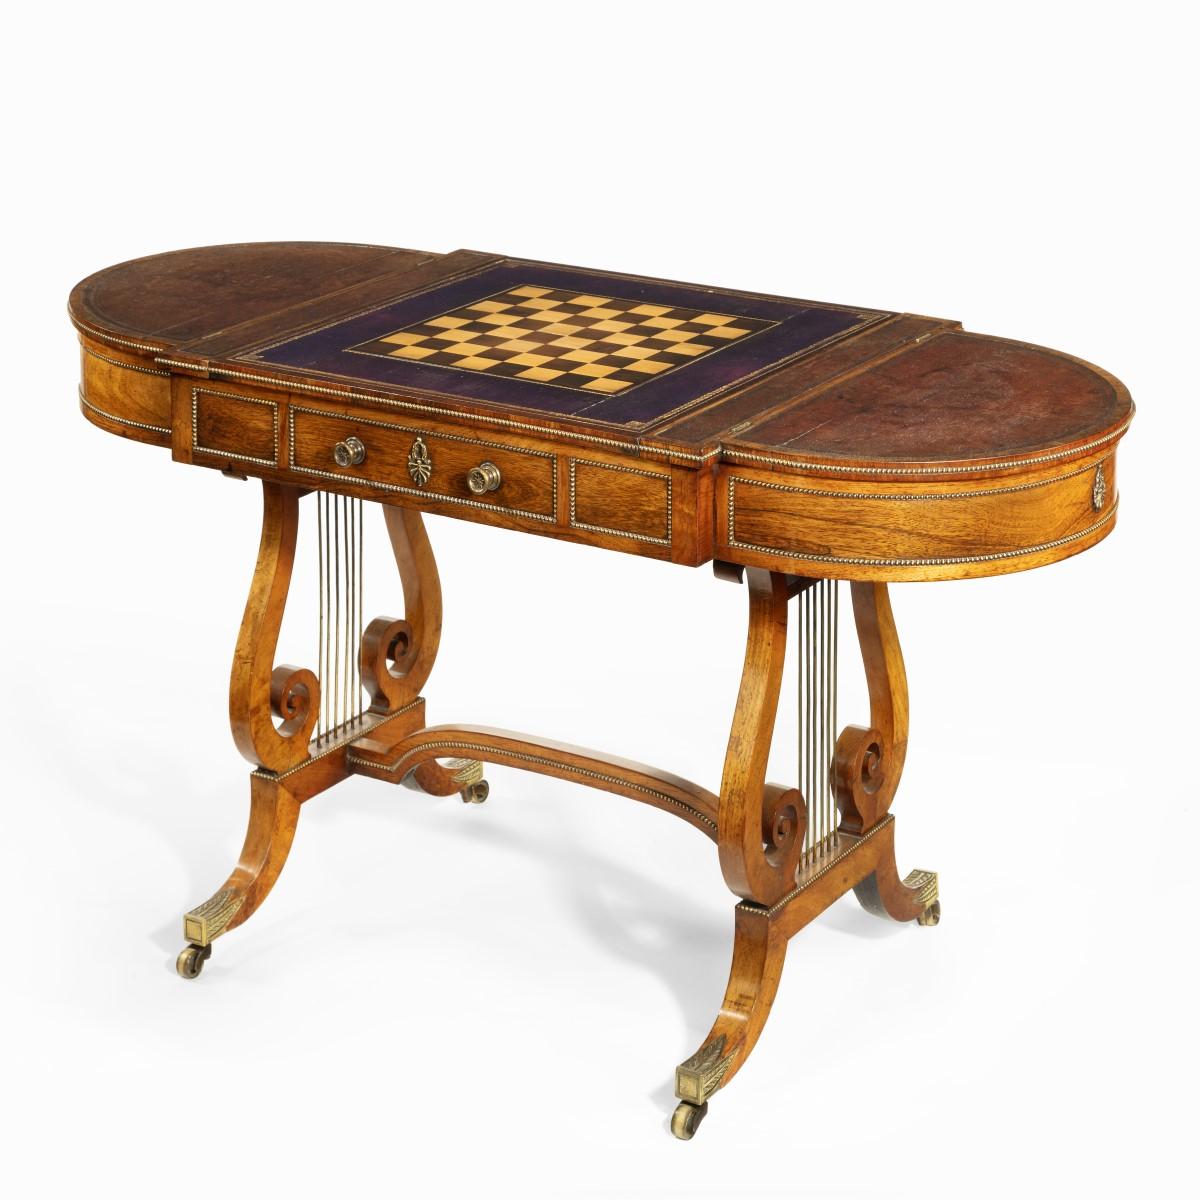 Regency Period Rosewood Sofa Games Table Attributed to Gillows of Lancaster In Good Condition For Sale In Lymington, Hampshire